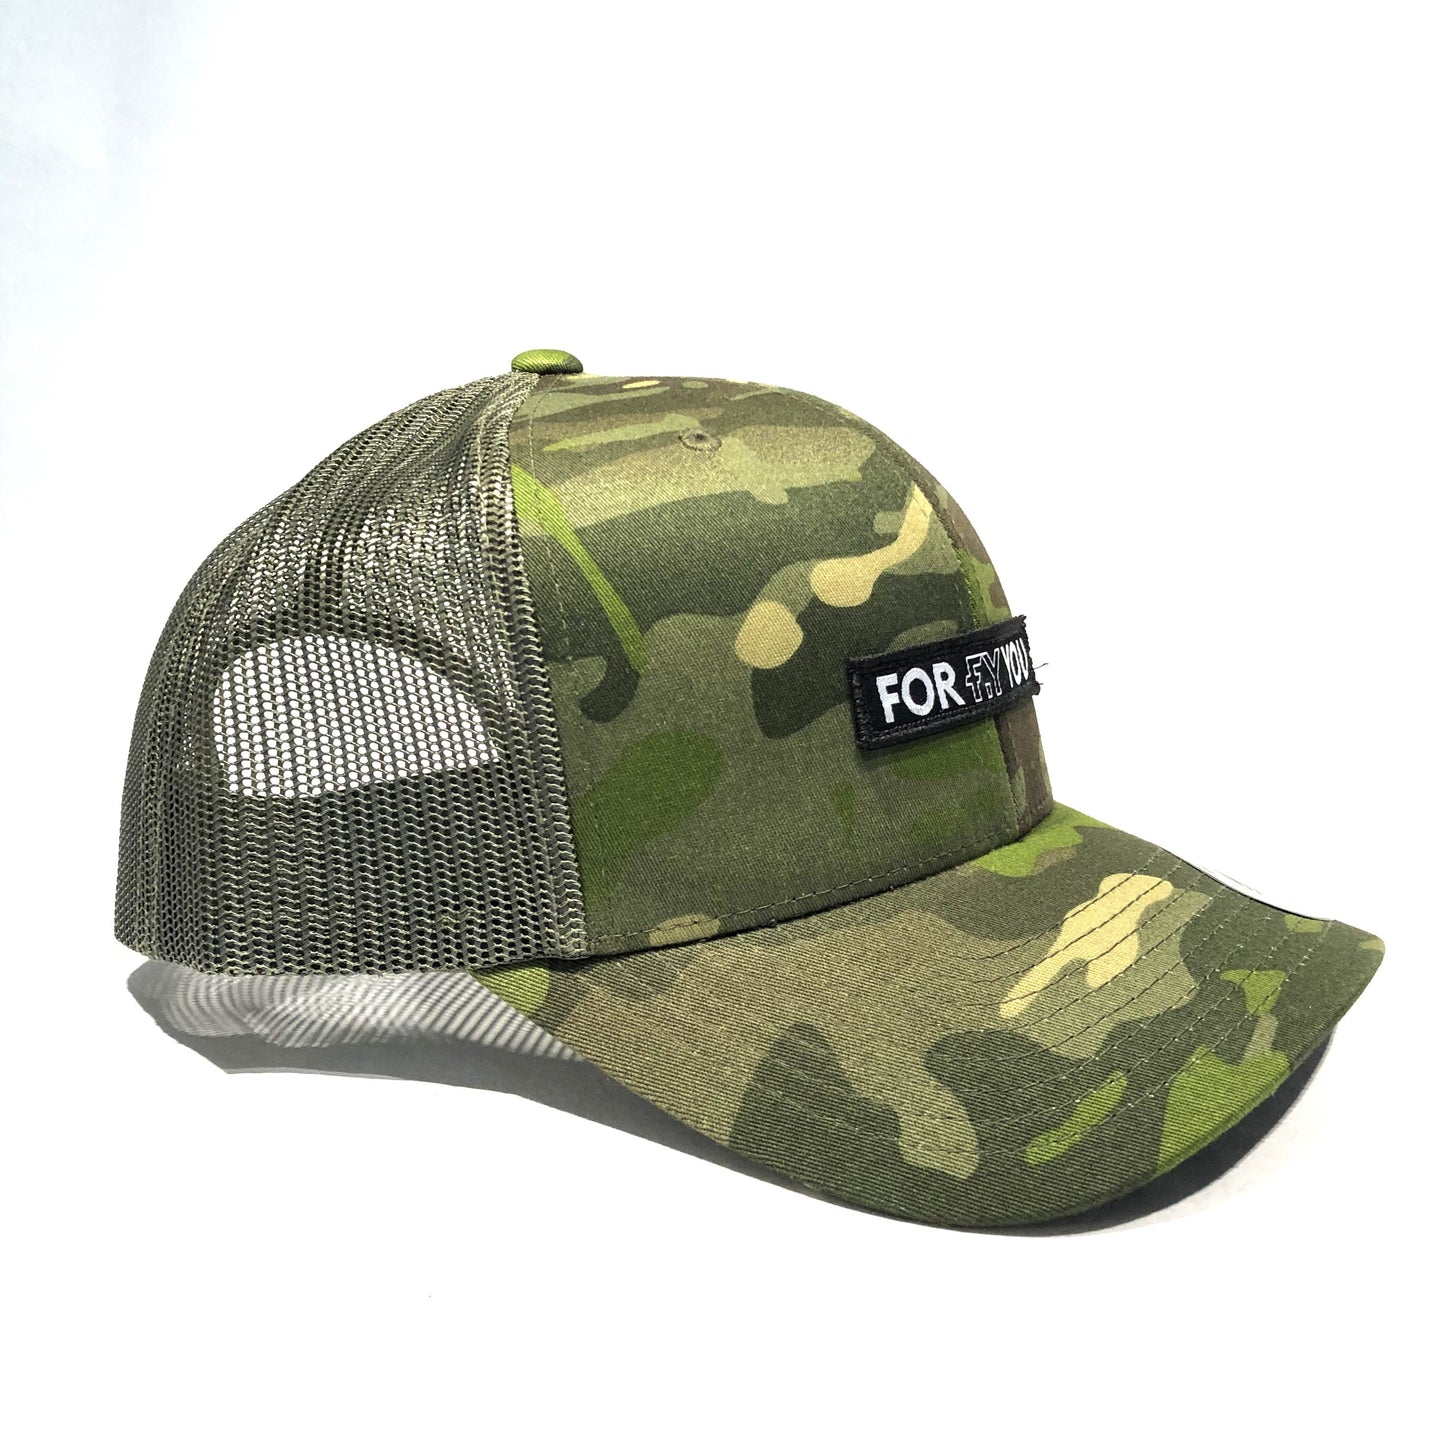 Casquette FOR YOU militaire